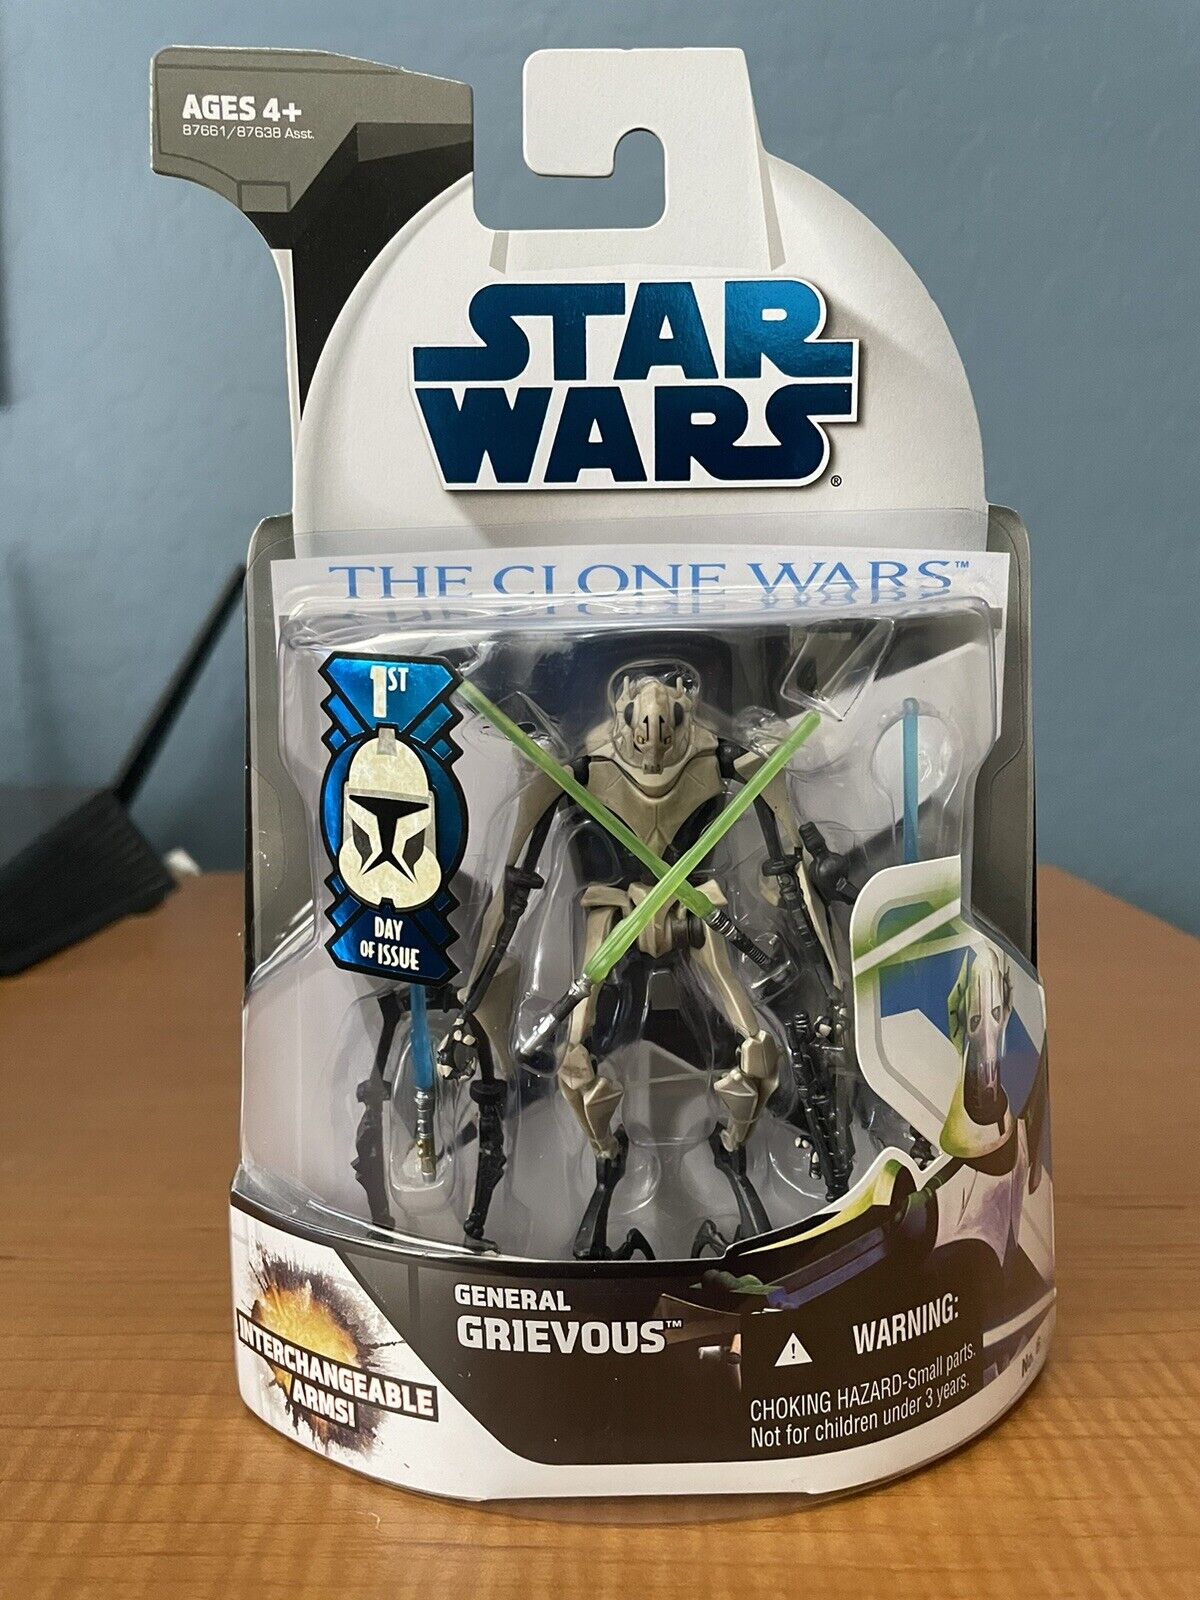 Star Wars Clone Wars General Grievous #6 1st Day Issue Action Figure 3.75 inch